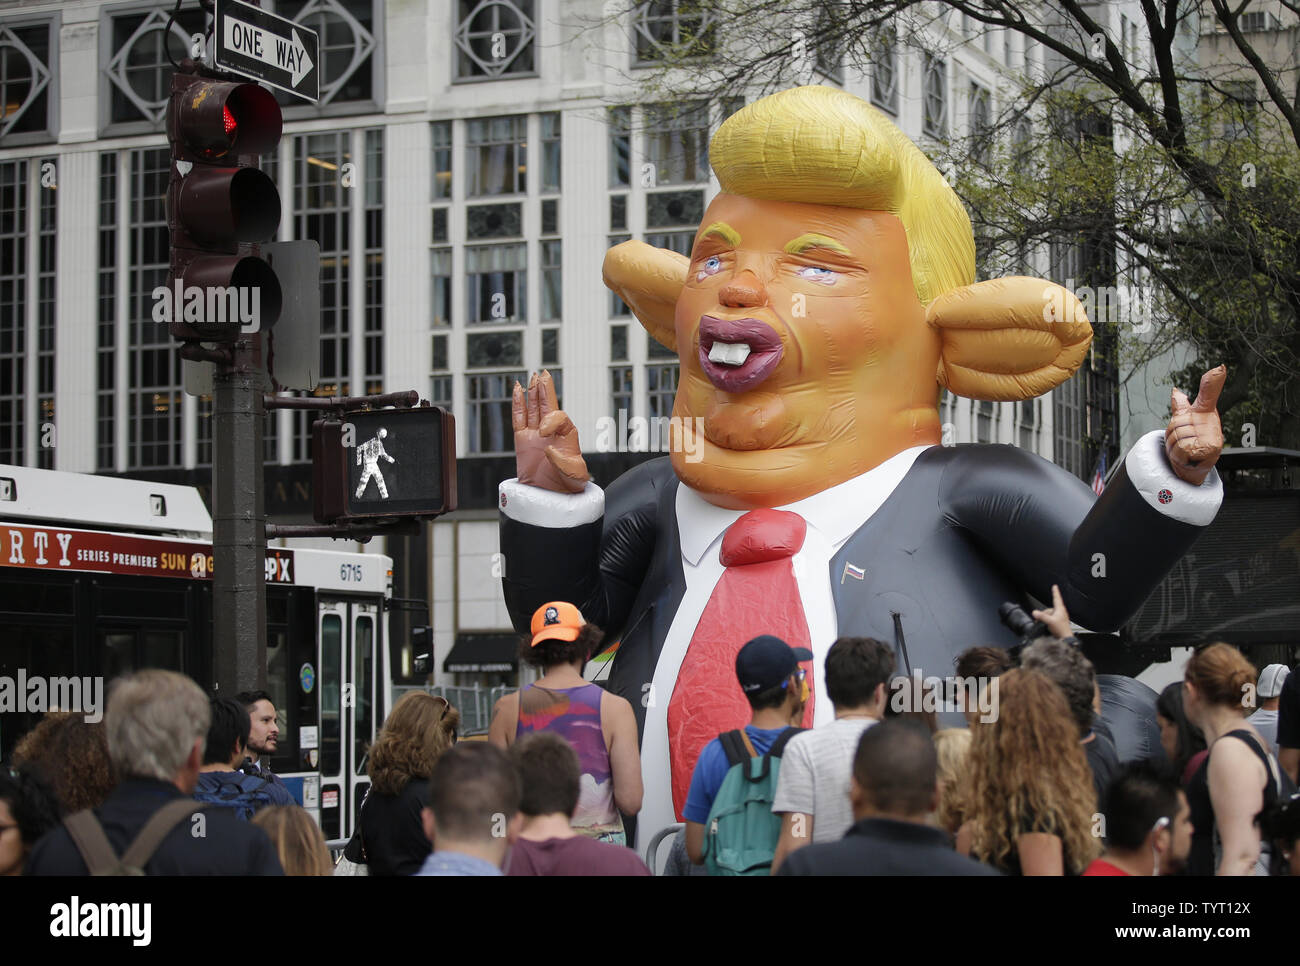 An inflatable Trump chicken balloon is parked on Fifth Avenue at a protest on August 14, 2017 at Trump Tower in New York City. Thousands of protesters crowded the streets around Trump Tower. The protest follows a series of rallies across New York City and the country due to President Donald Trump's response to the fatal white nationalist rally in Charlottesville, Virginia over the weekend.      Photo by John Angelillo/UPI Stock Photo